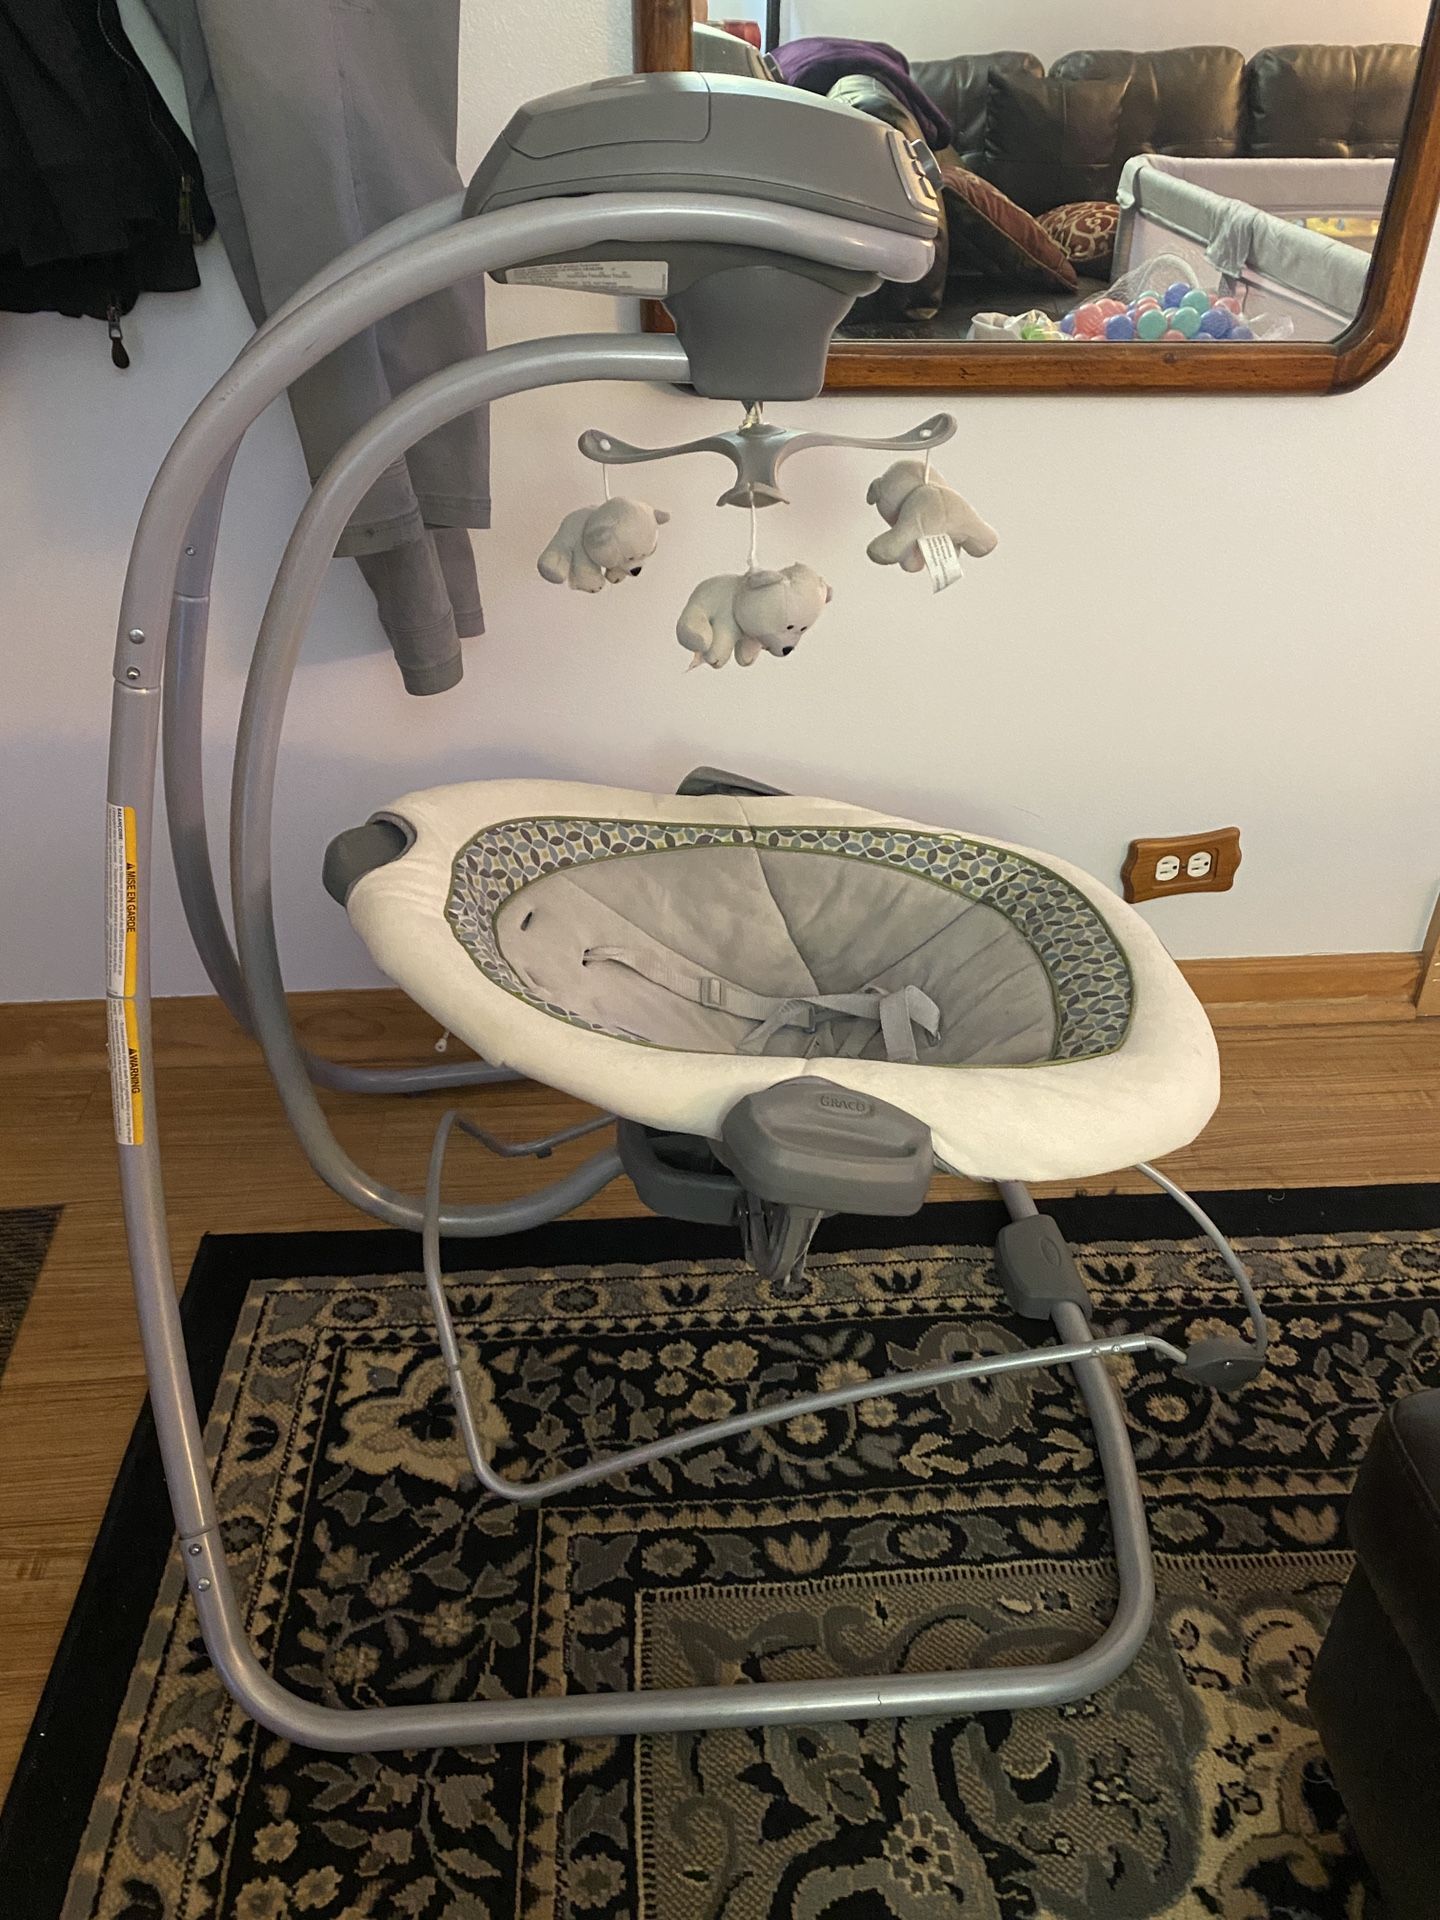 Graco Baby Swing W/ Sounds And Vibration